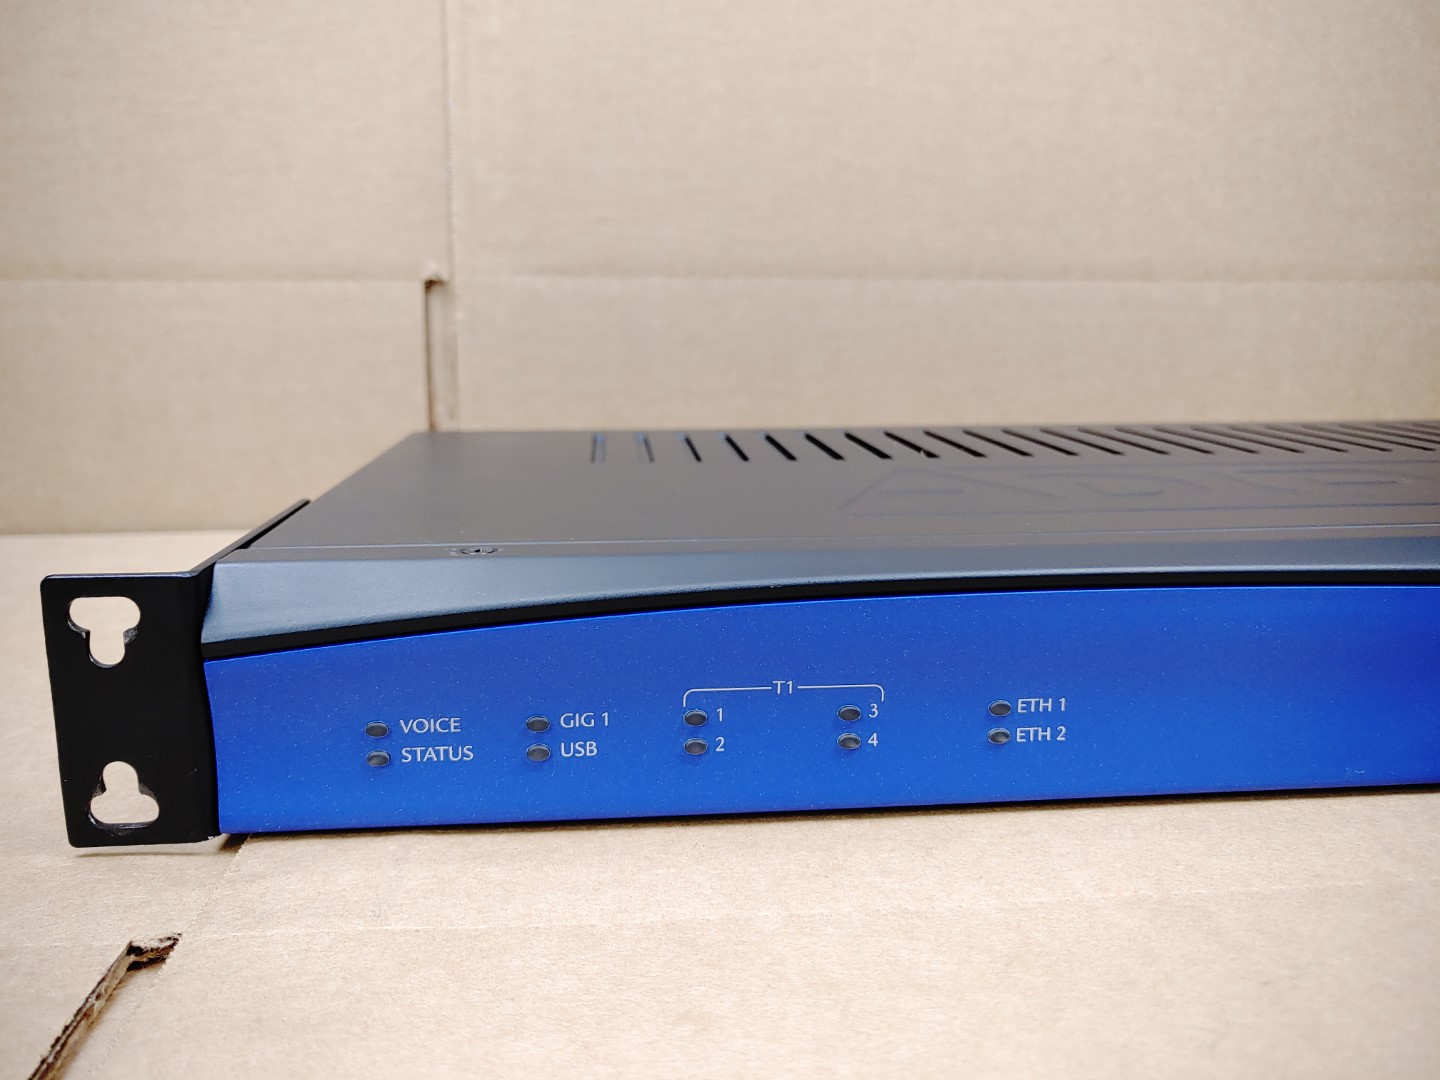 Great Condition! Tested and pulled from a working environment! **NO POWER CORD INCLUDED**Item Specifics: MPN : 4243908F1UPC : N/AForm Factor : Rack-MountableBrand : ADTRANModel : Total Access 908e (4243908F1)Type : Router - 2